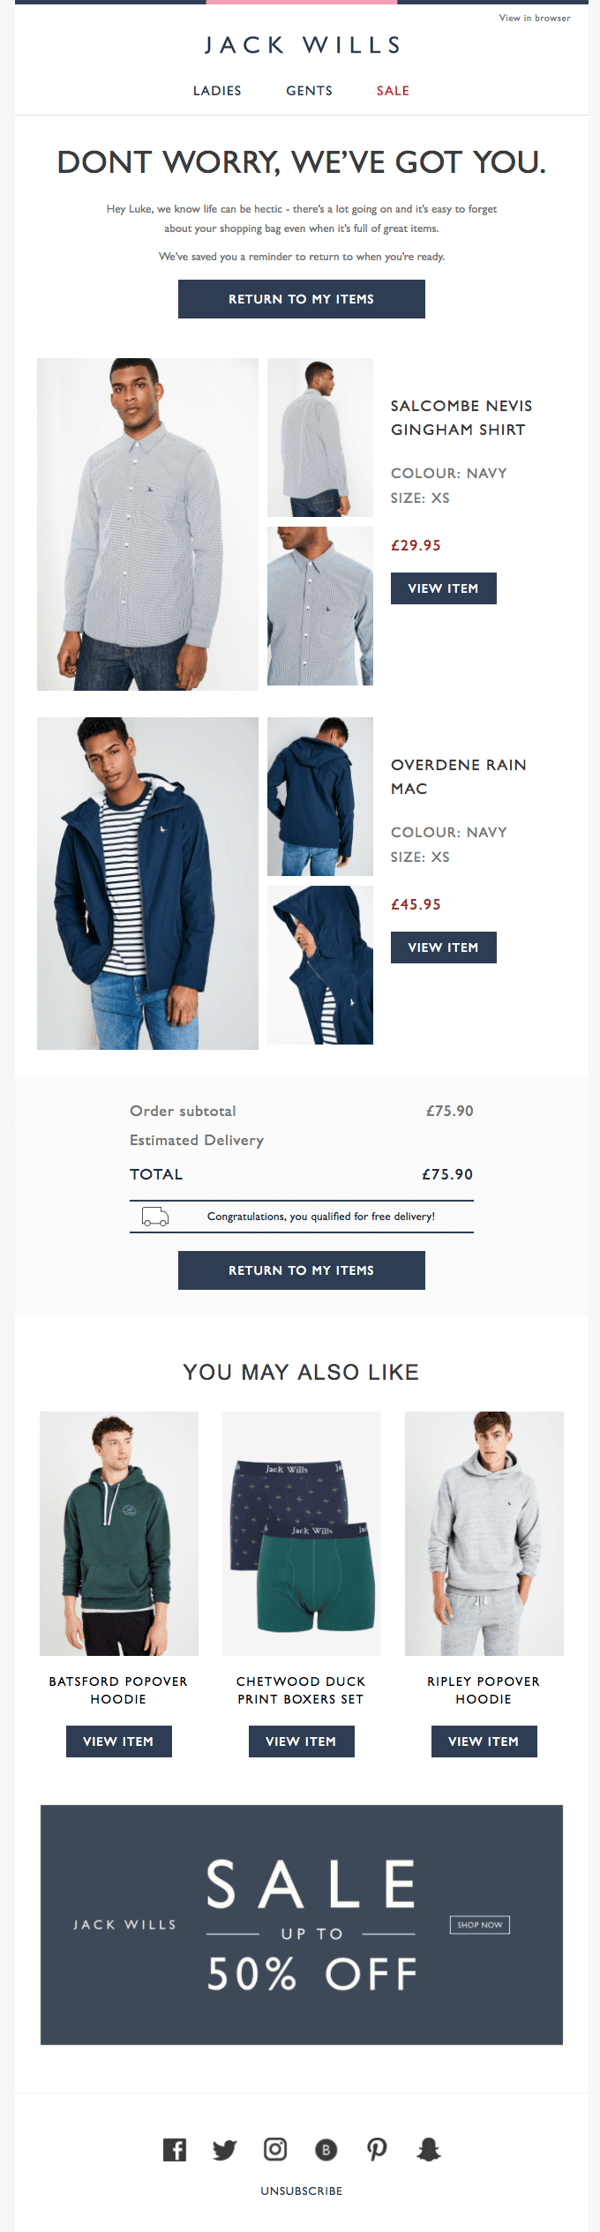 Jack Wills Cart Abandonment Email